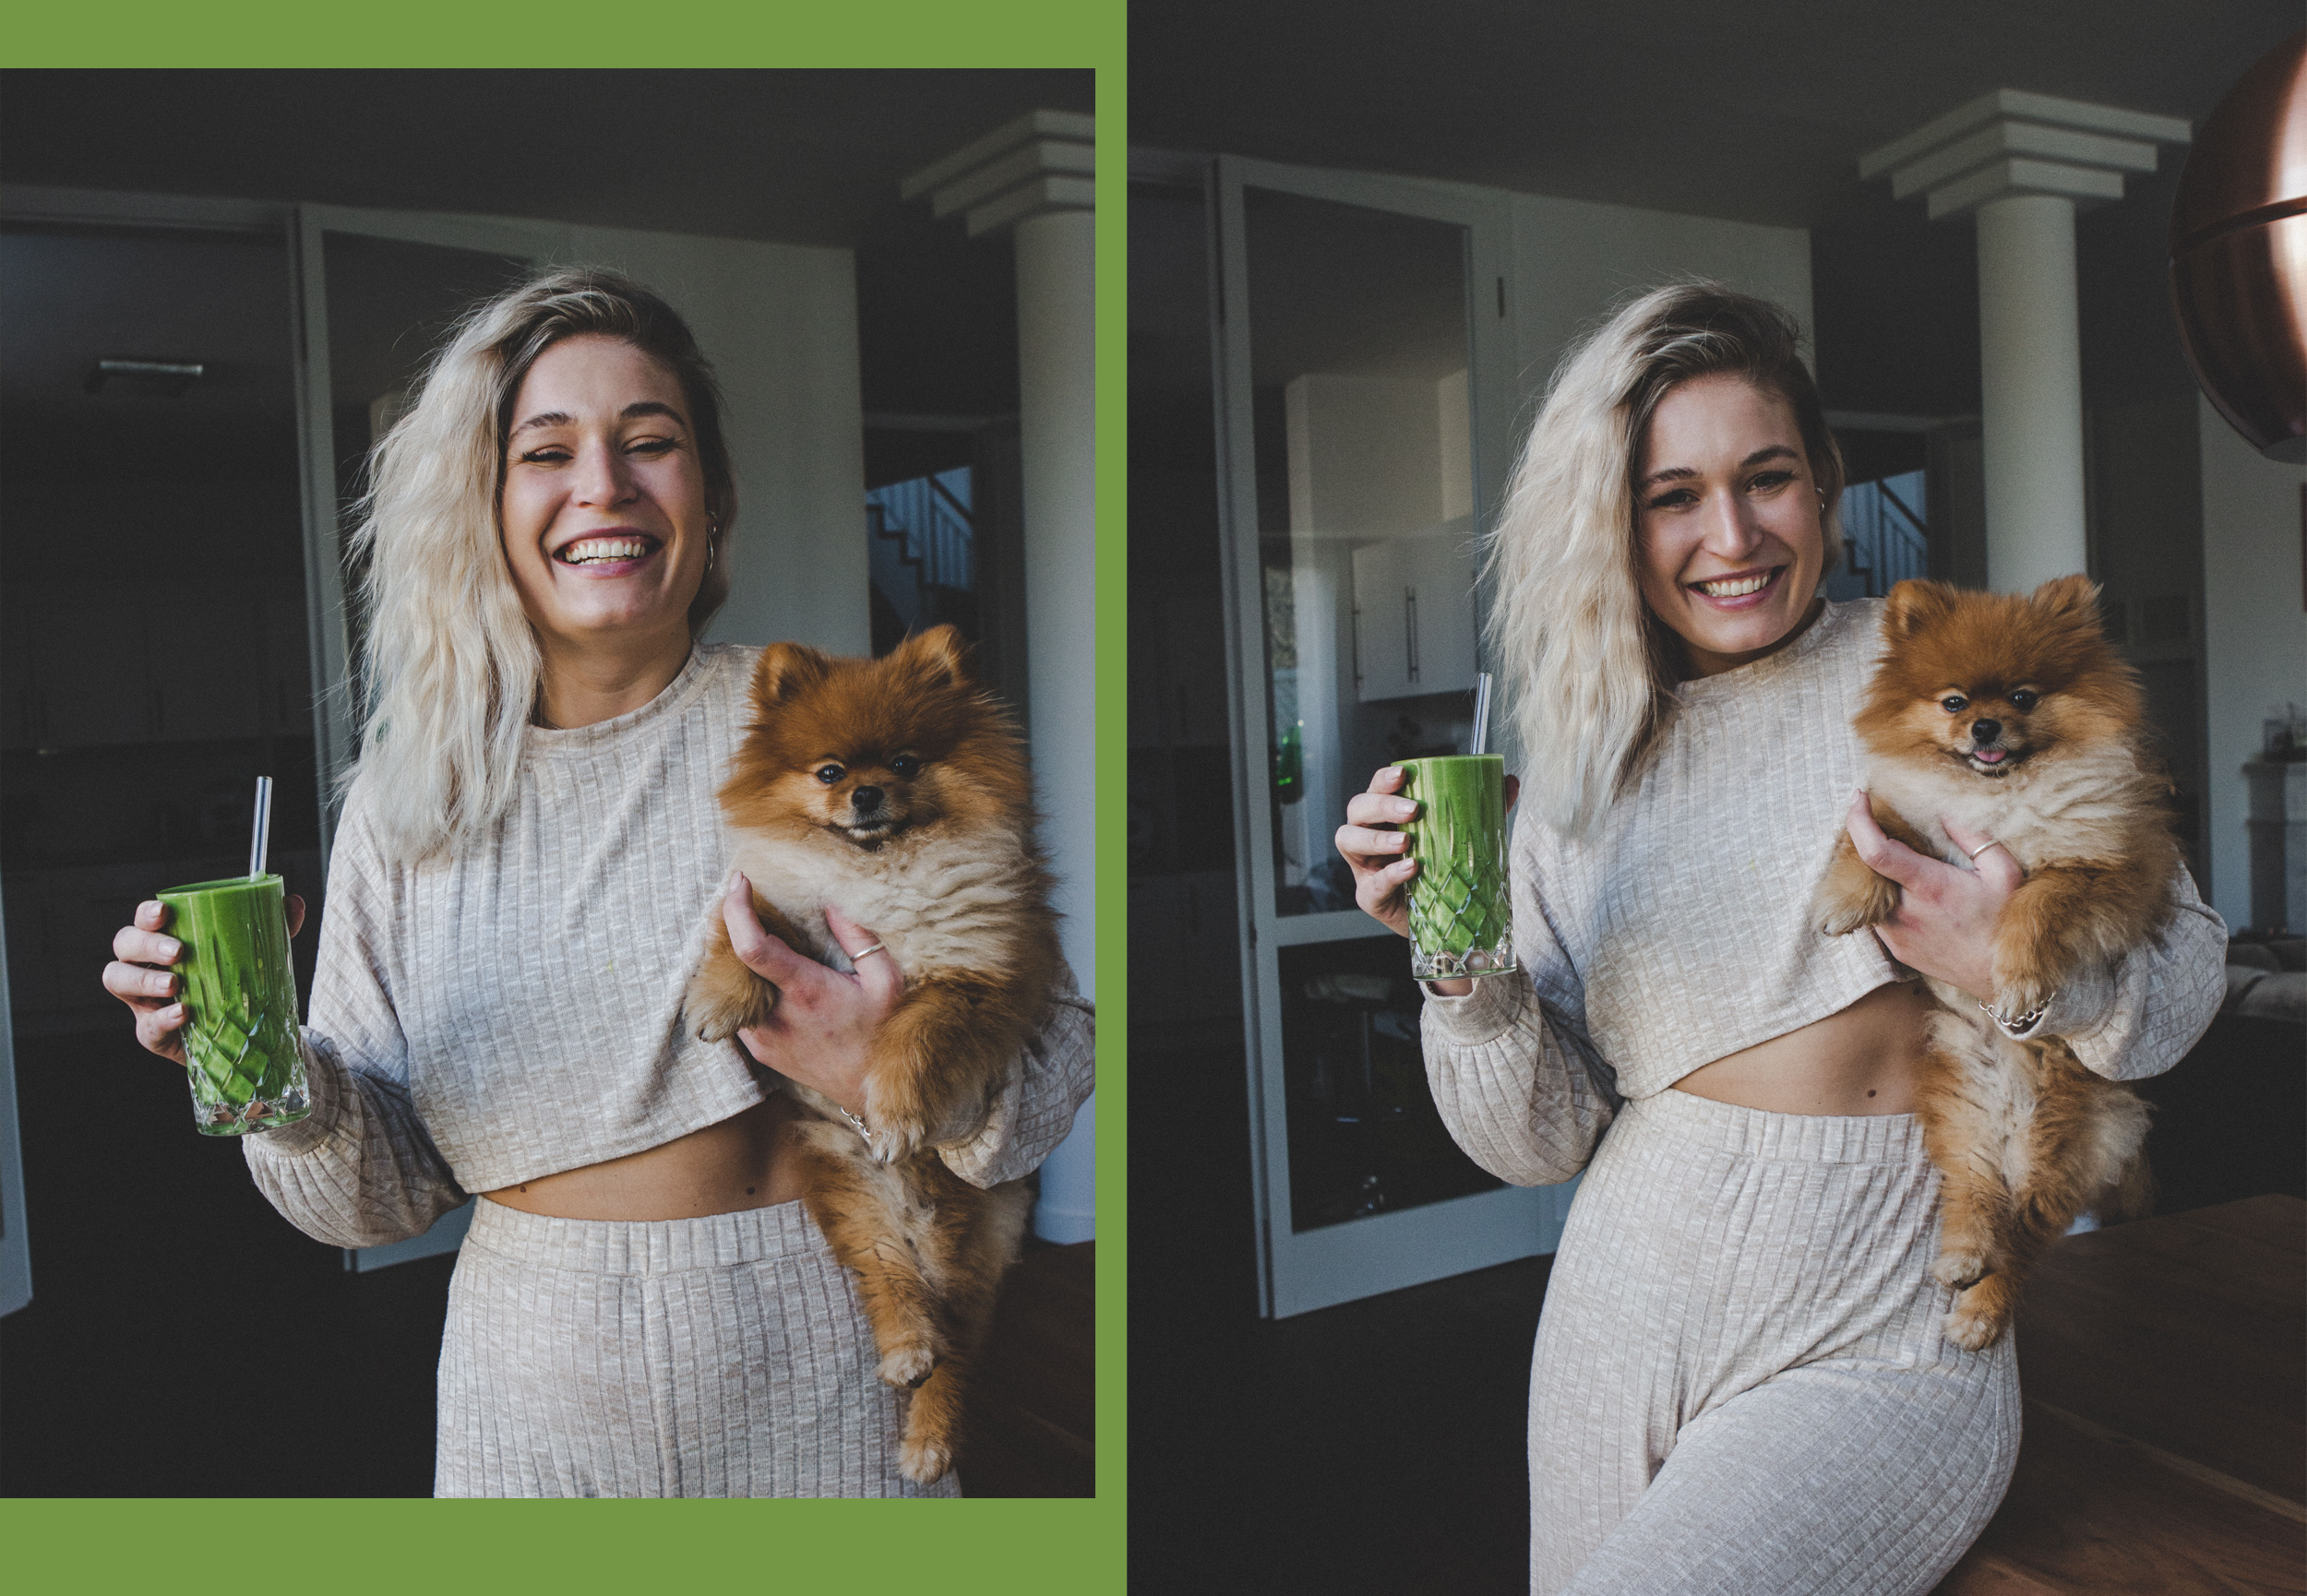 lauralamode-tipps-what to do-quarantine-recipe-rezept-green smoothie-healthy-healthy lifestyle-fitness-berlin-fashion-lifestyle-to do-to do list